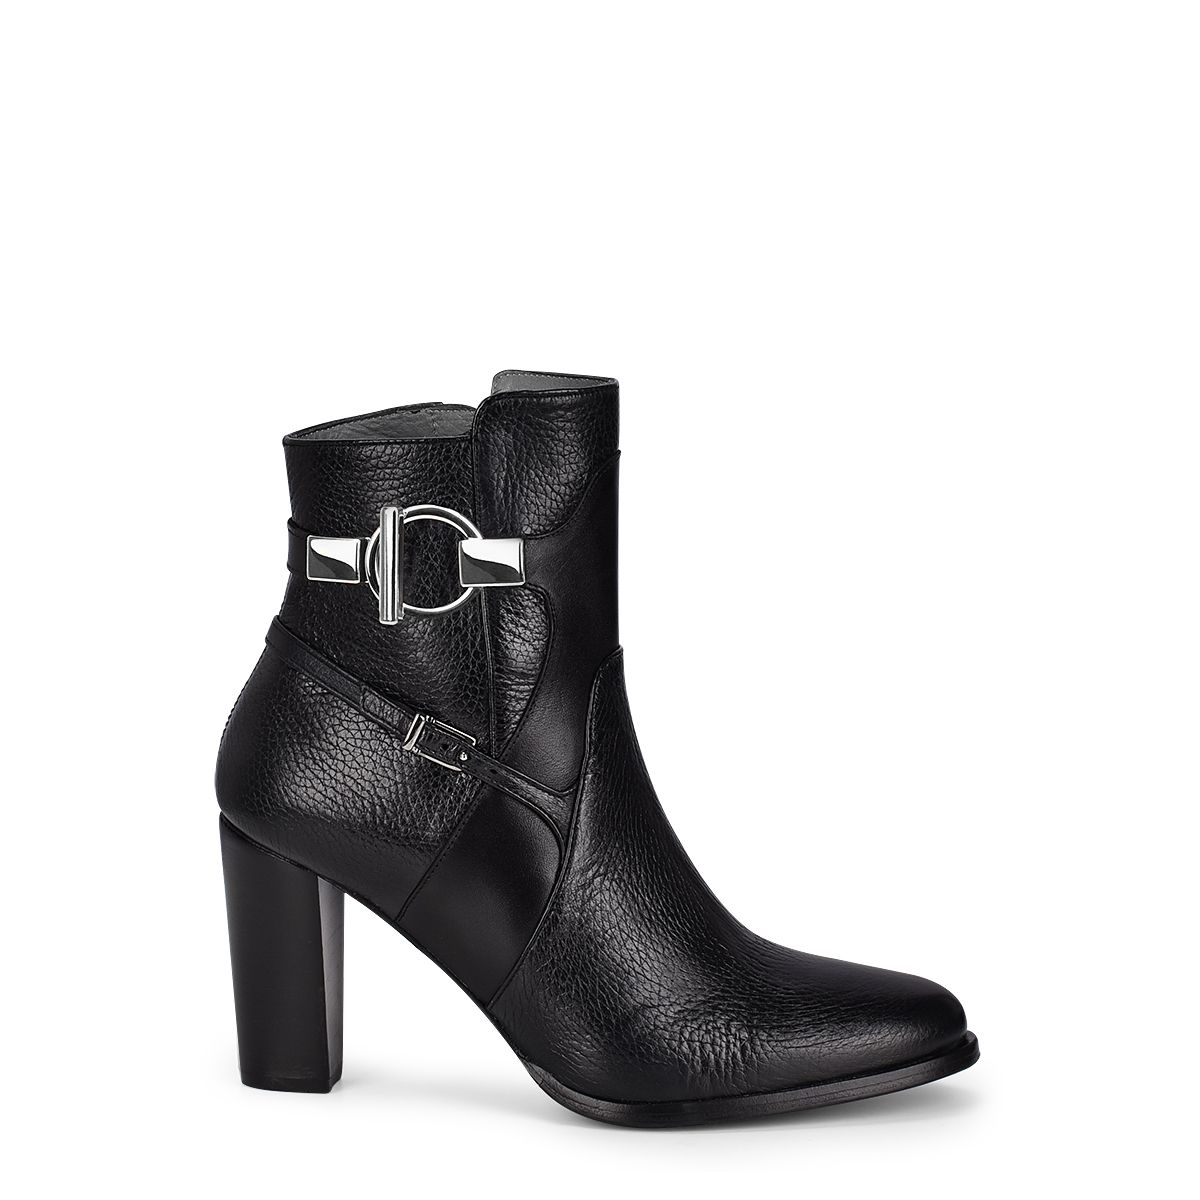 3G5VNTS - Franco Cuadra black casual fashion deer leather ankle boots for women-Kuet.us